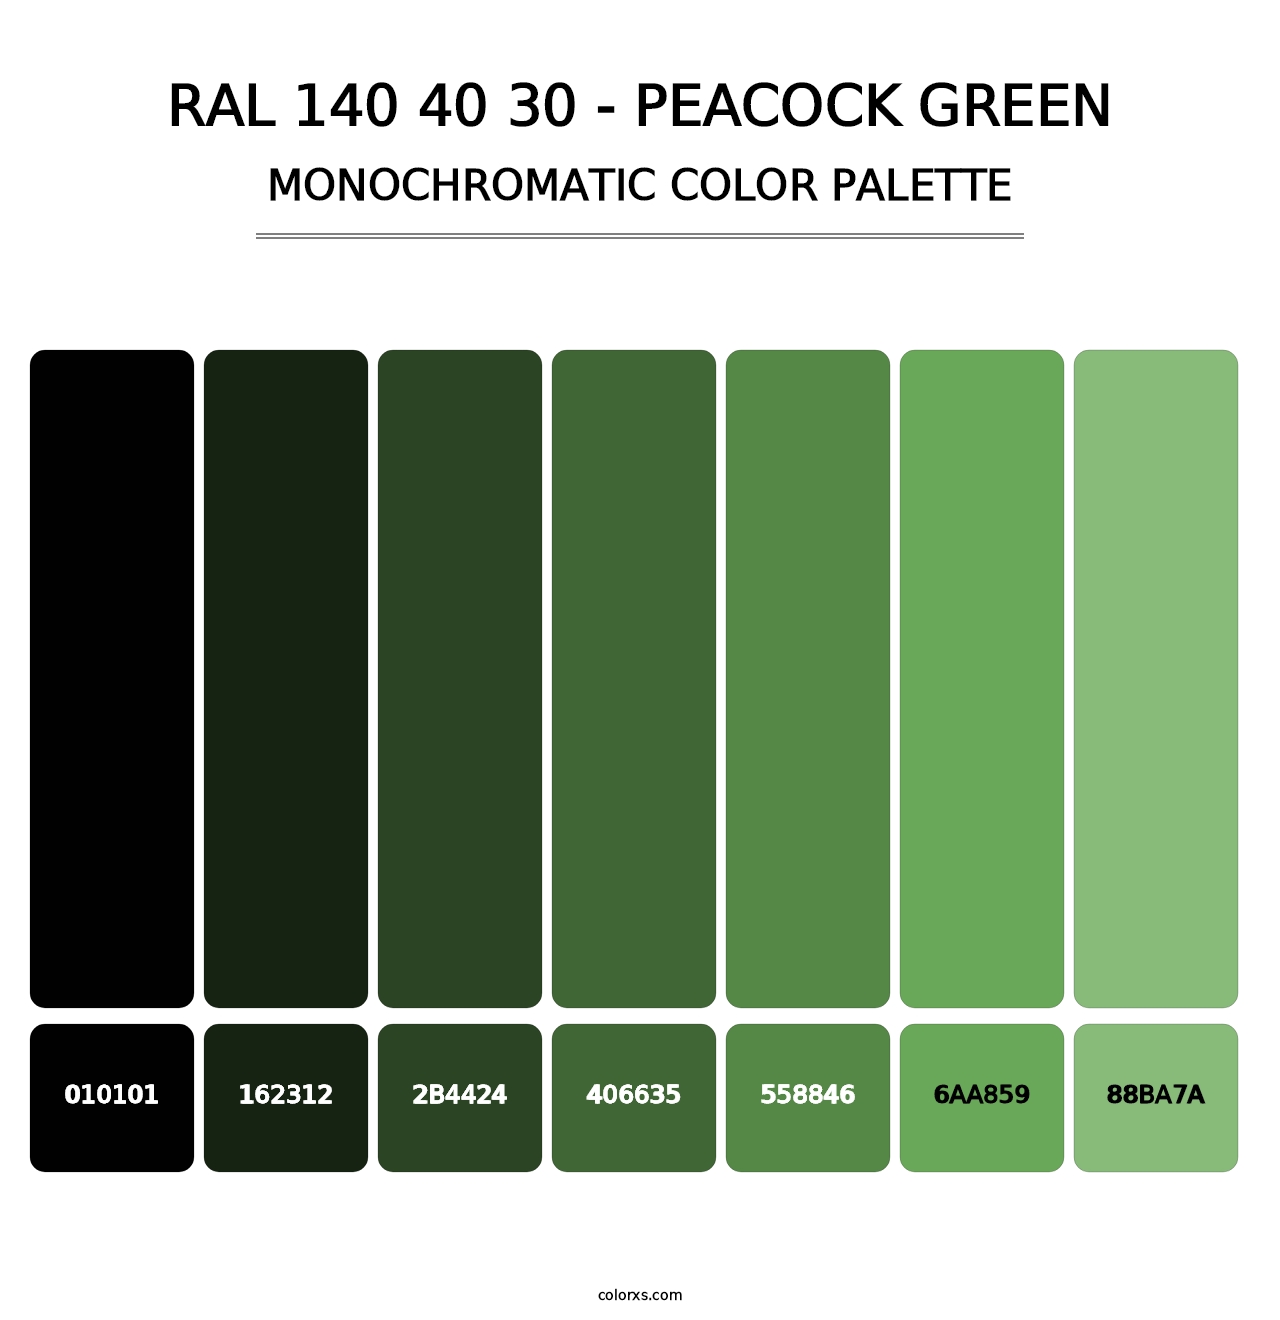 RAL 140 40 30 - Peacock Green - Monochromatic Color Palette